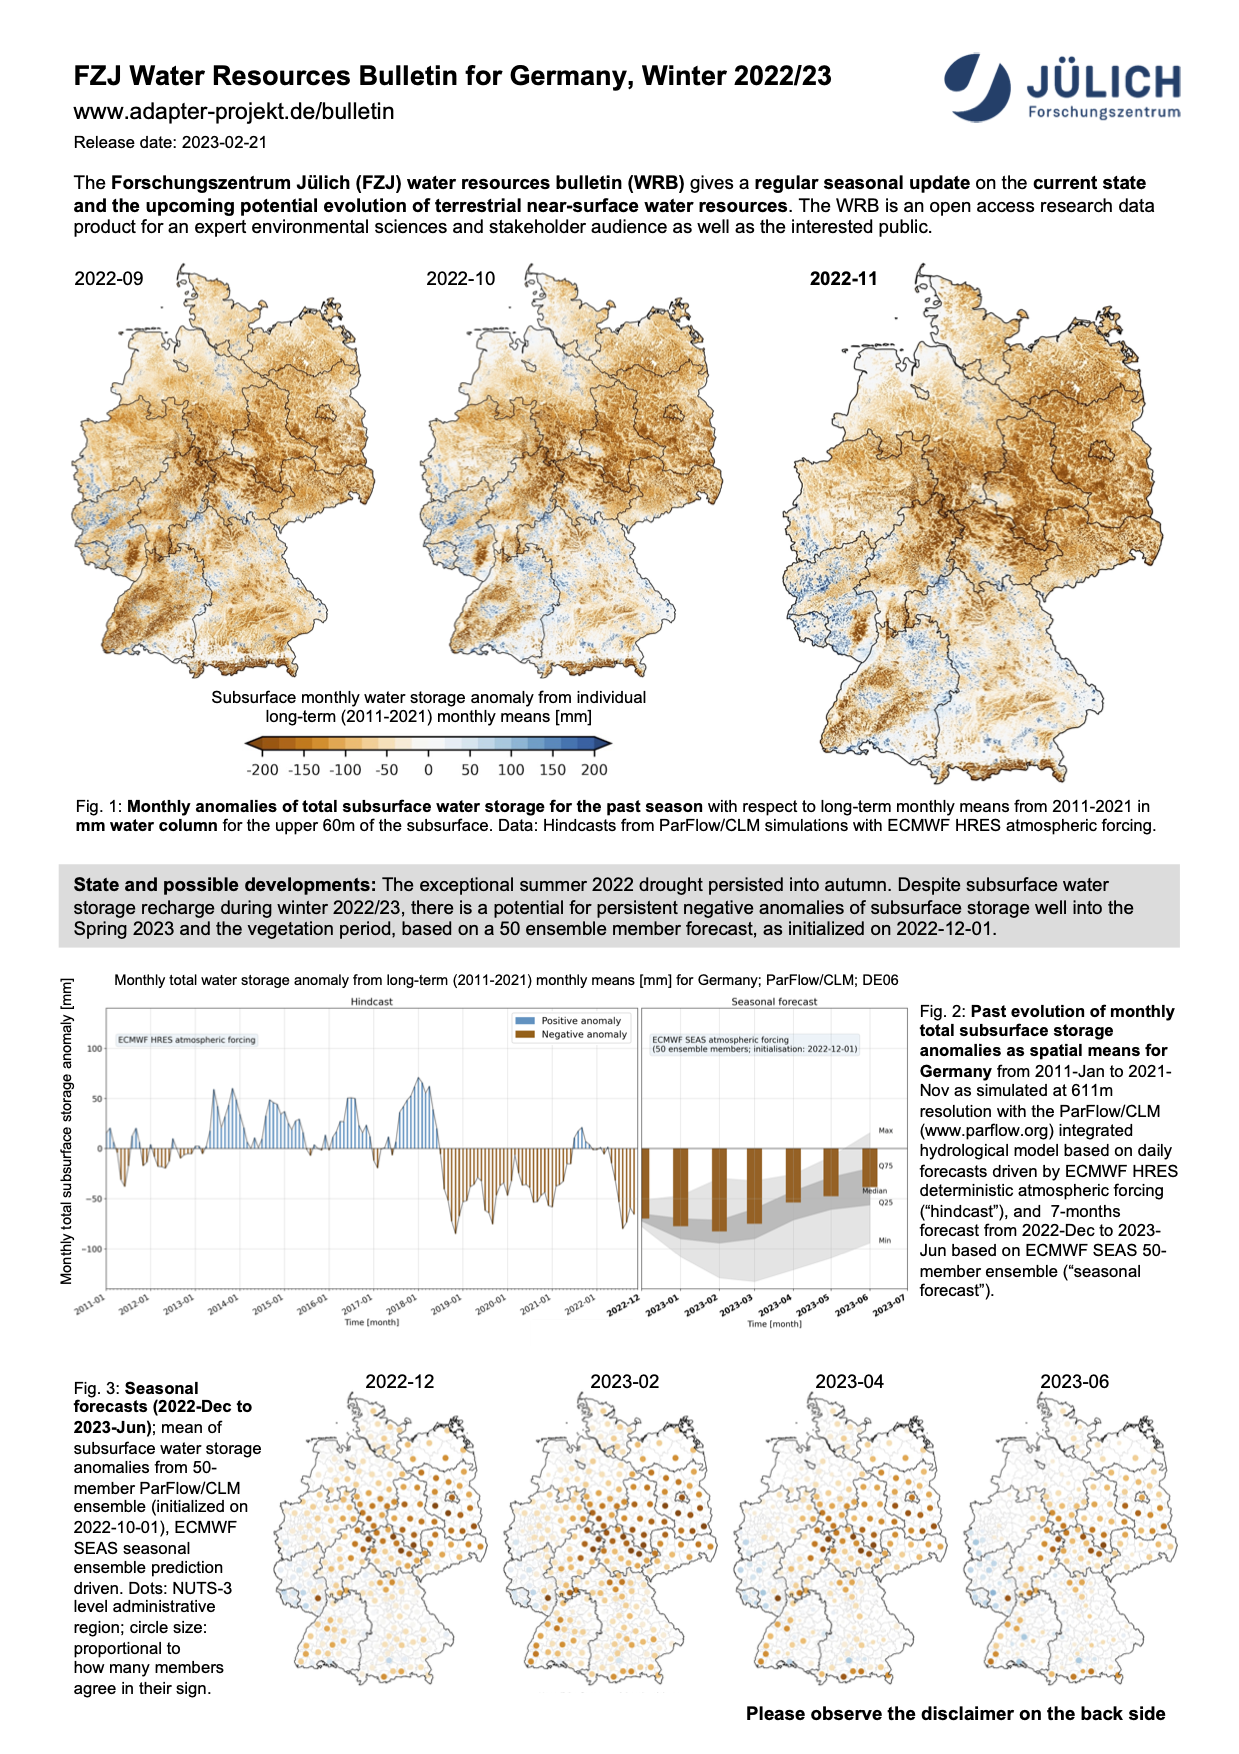 FZJ Experimental Water Resources Bulletin for Germany Winter 2022-23